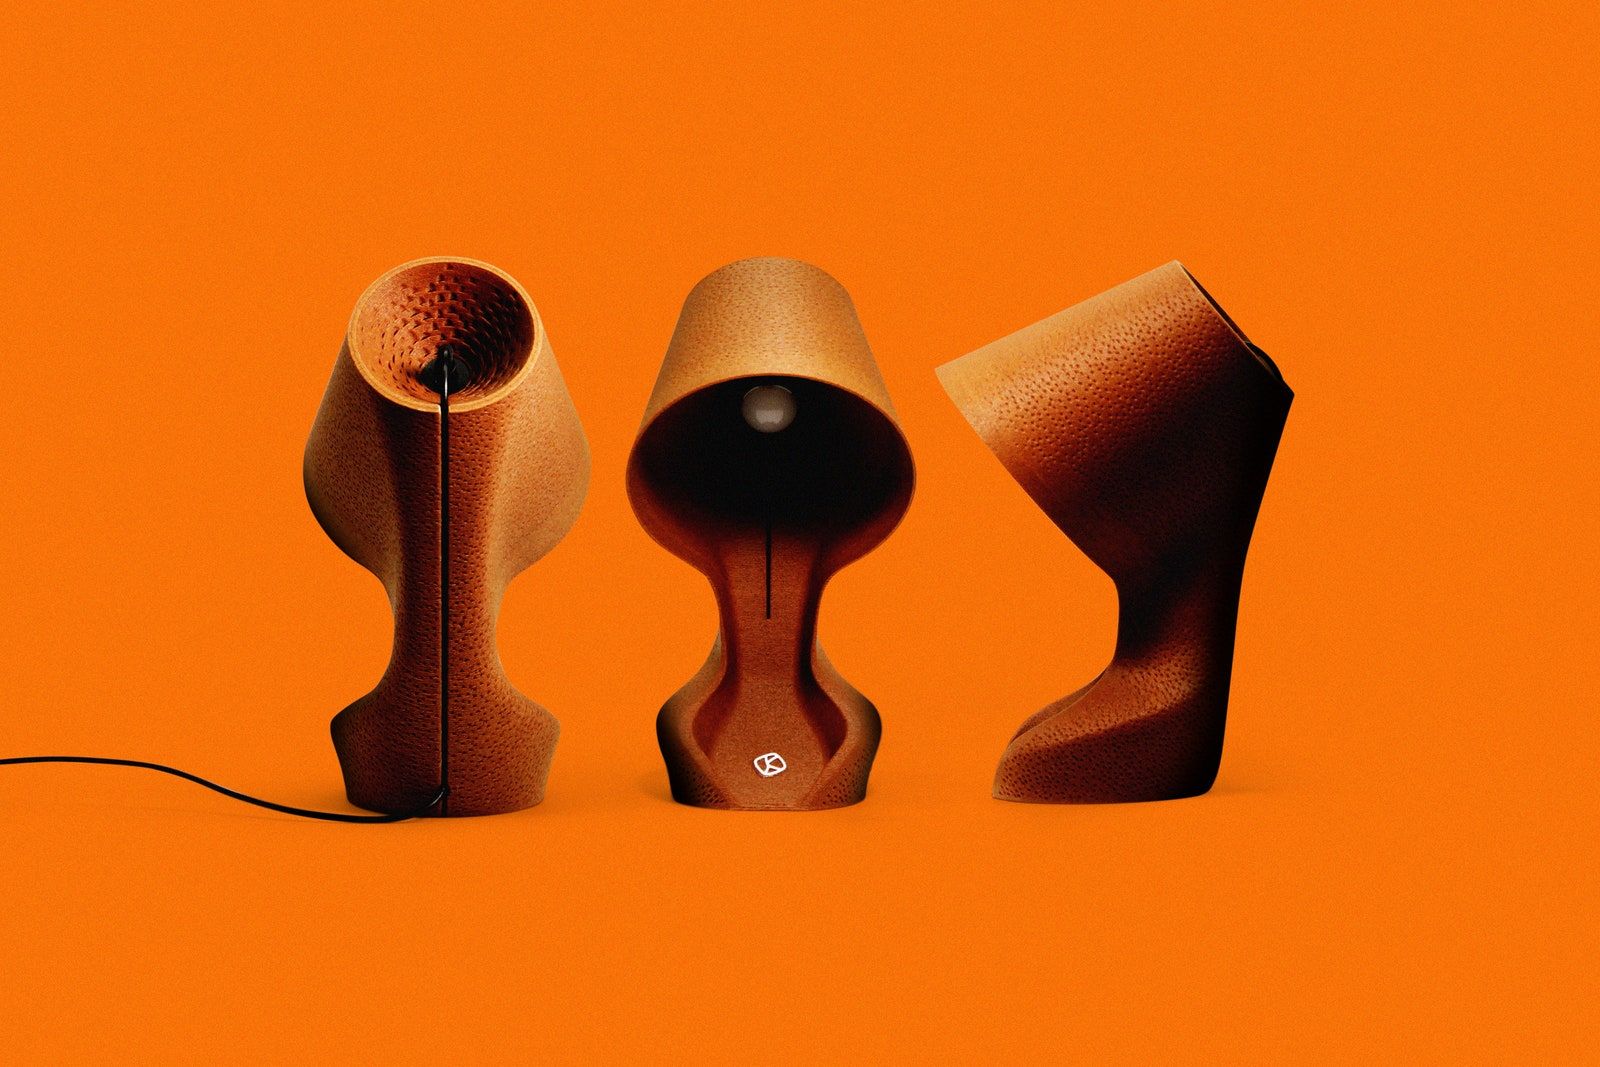 The world's first lamp printed from orange peels